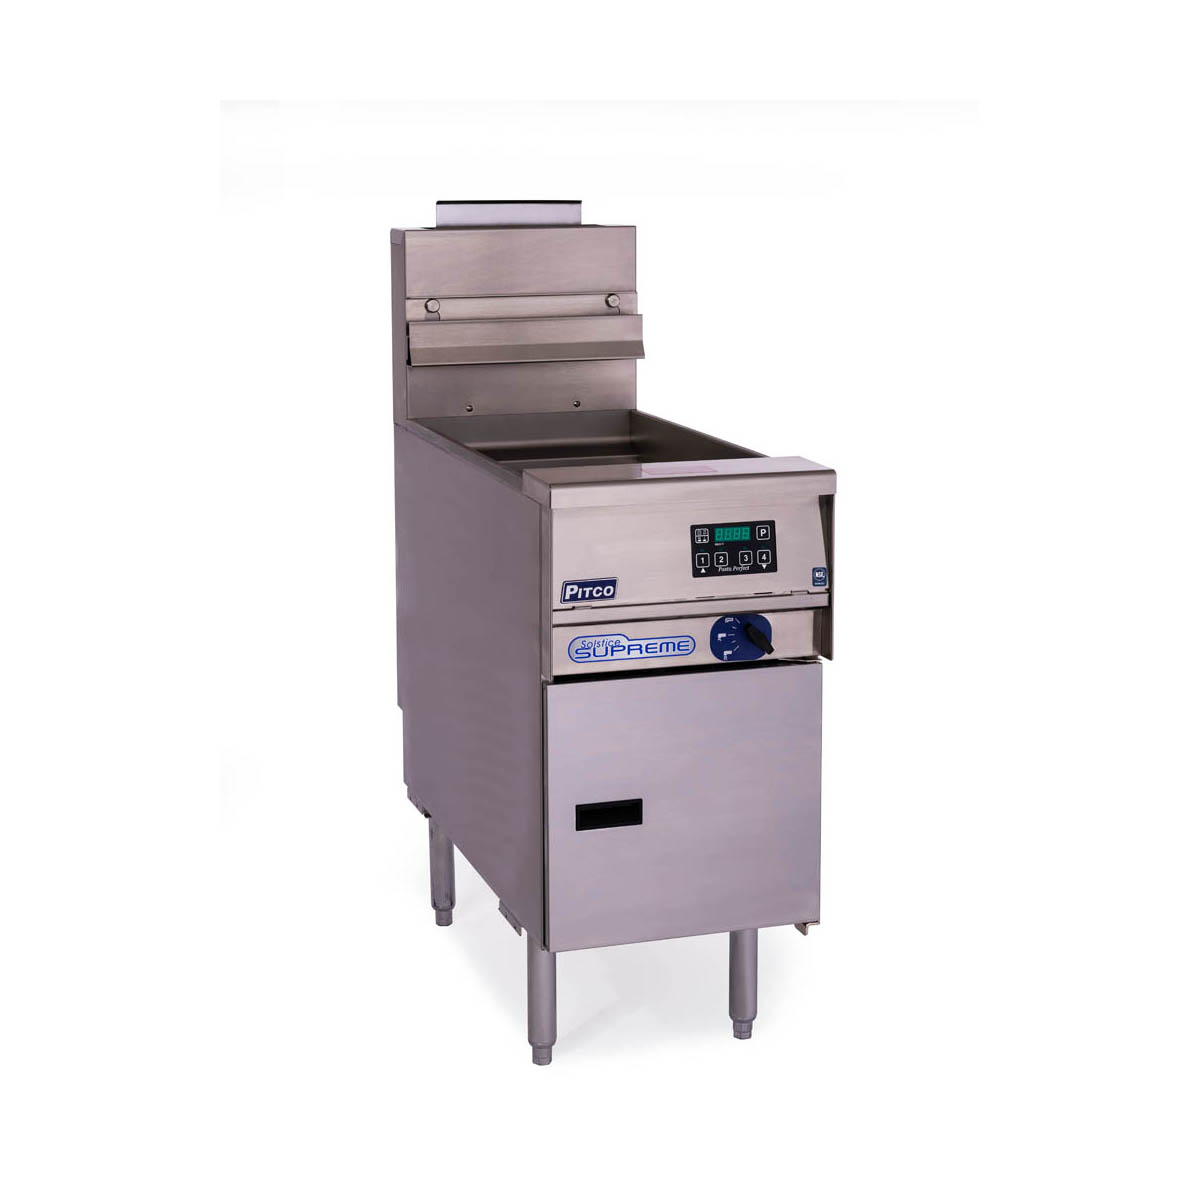 Pitco SSPG14 Gas Pasta Cooker